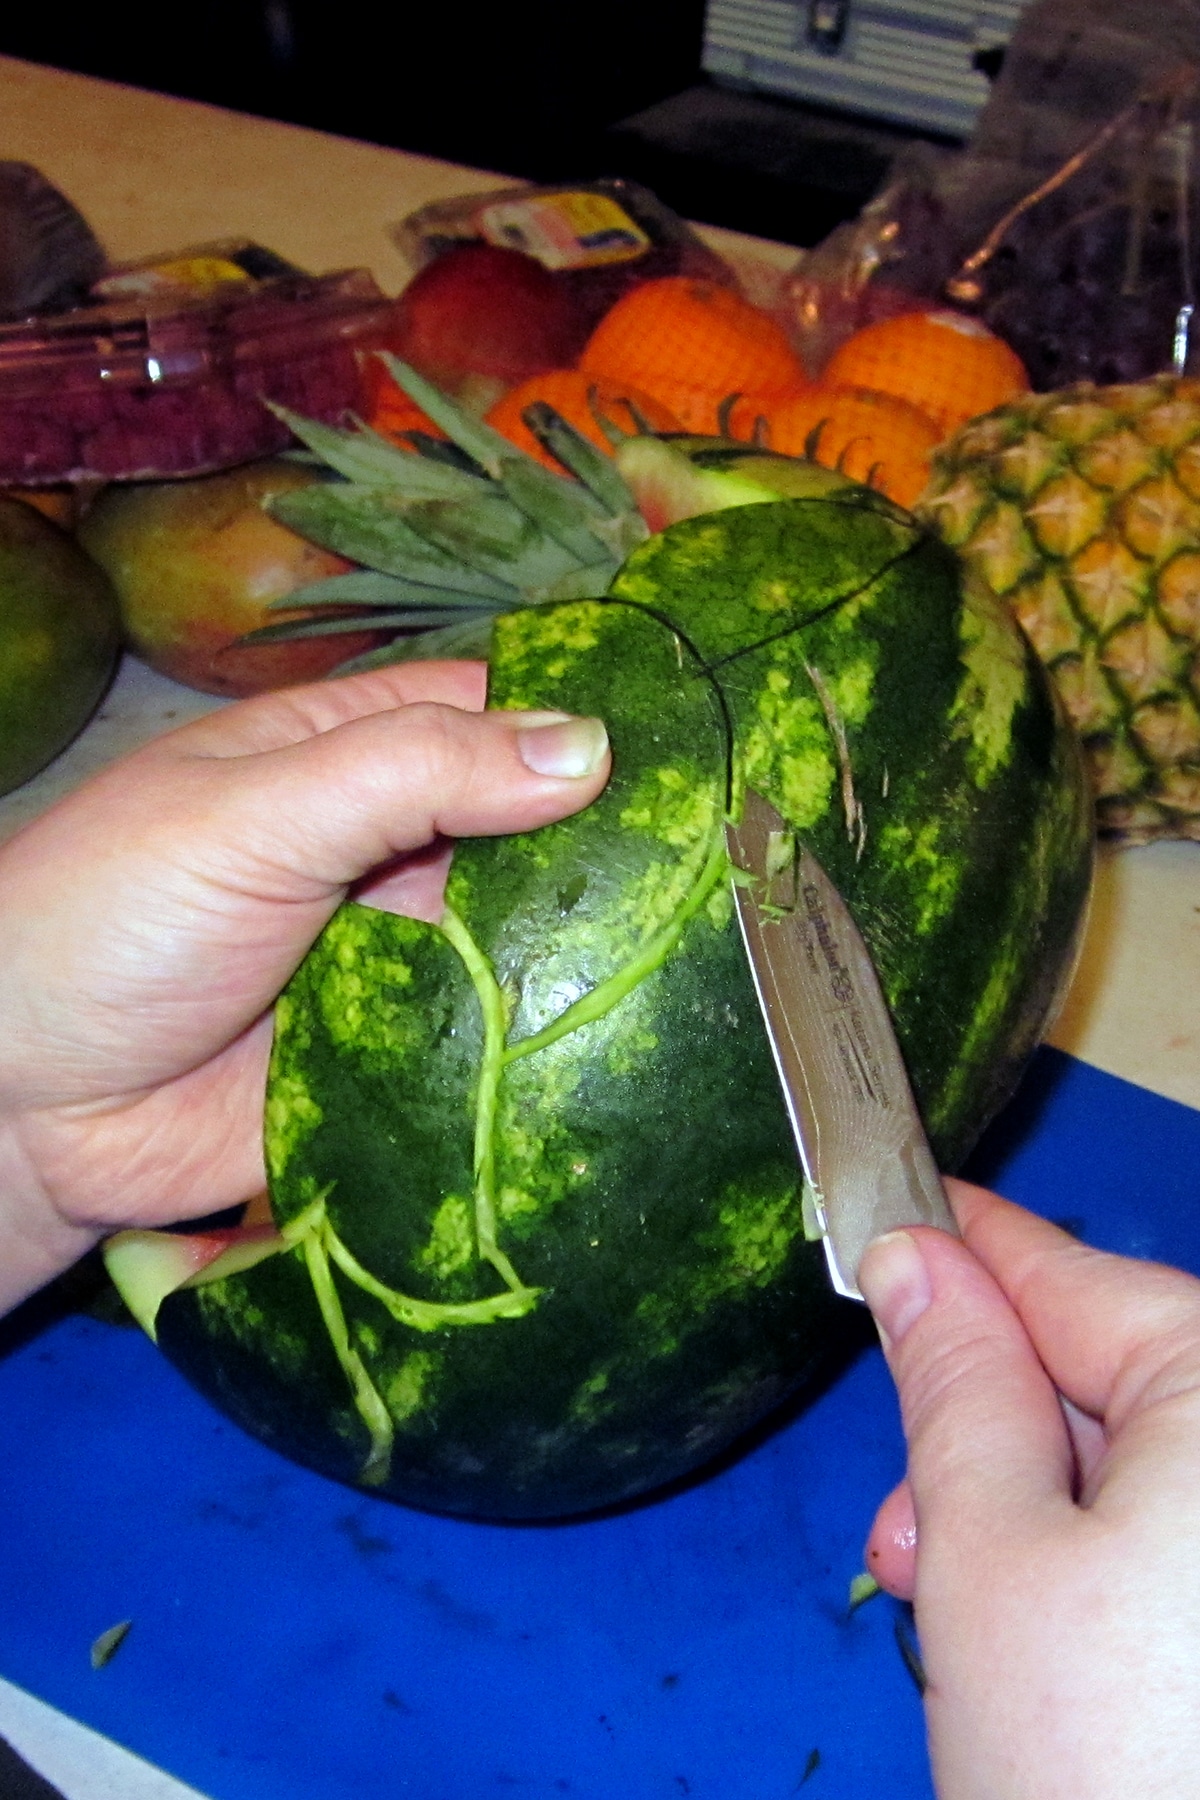 A paring knife is used to cut the edge of the caladium leaf design into the watermelon.